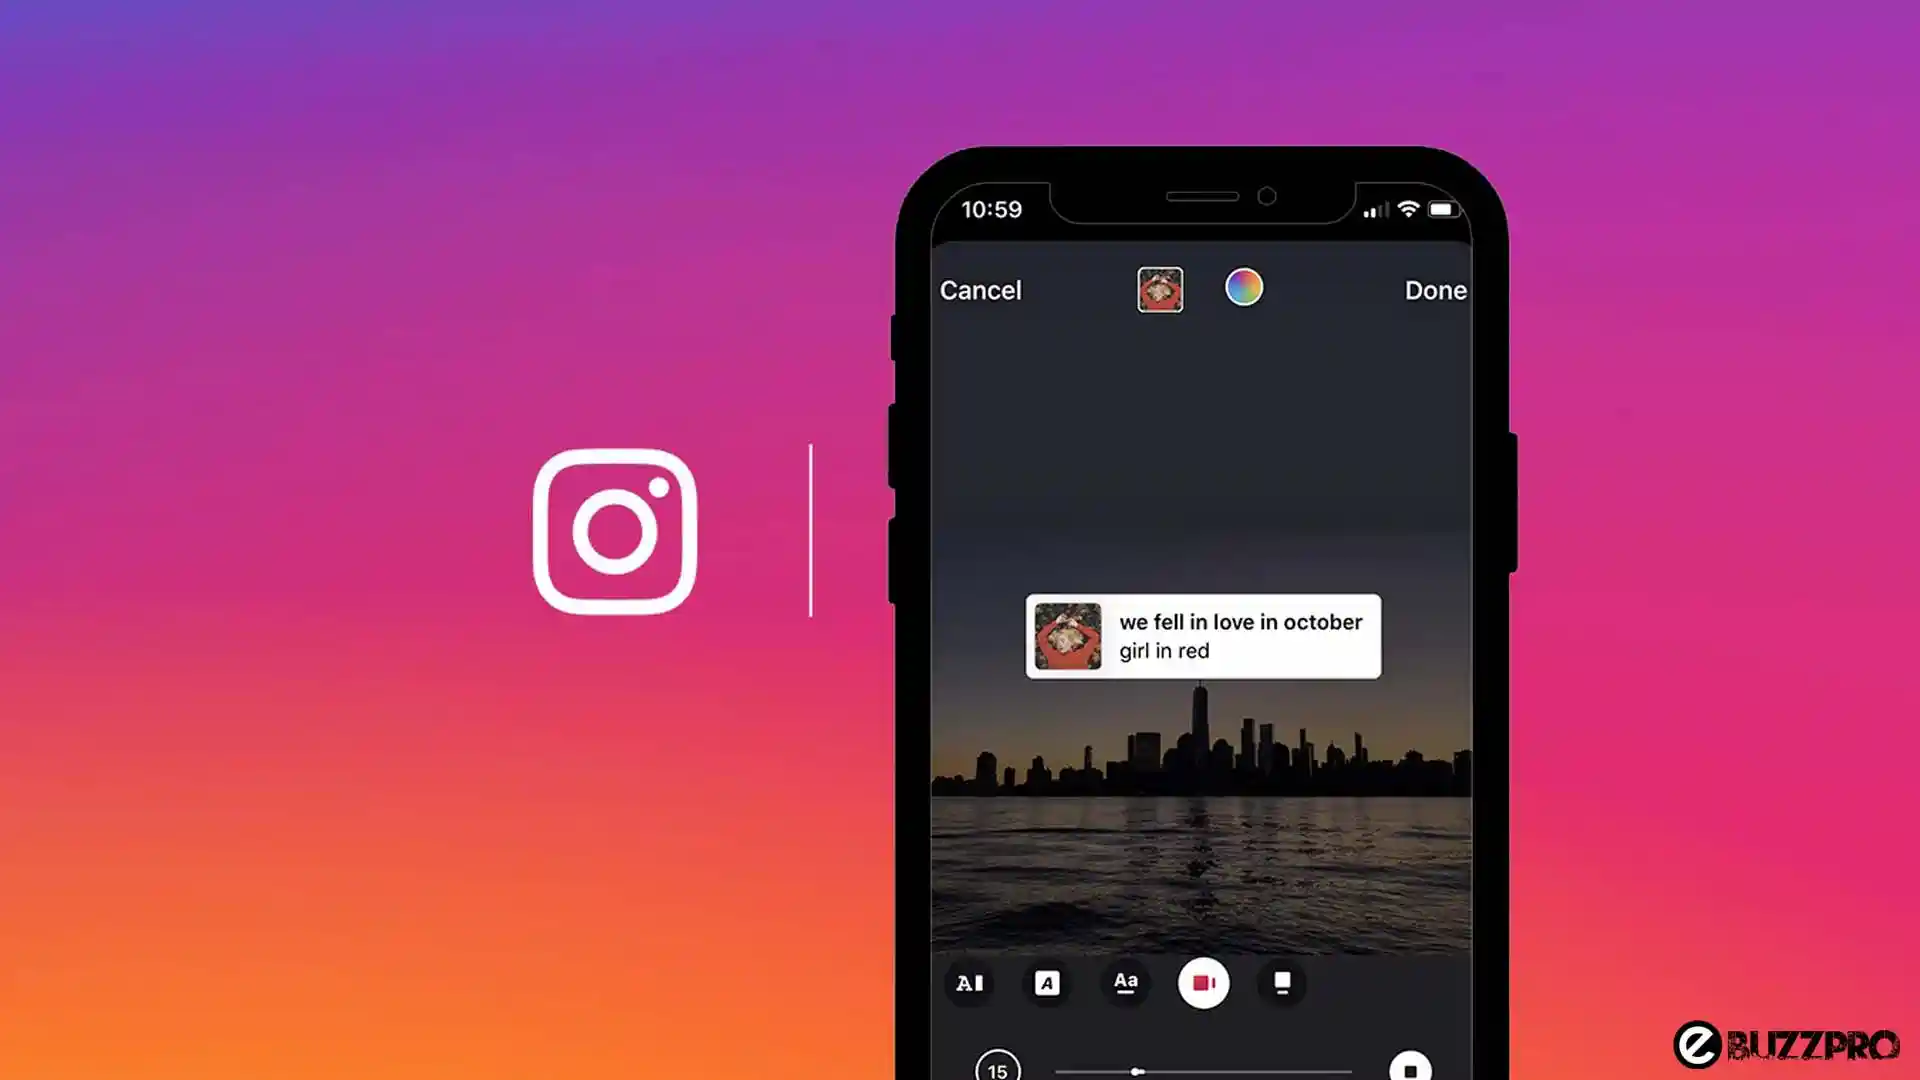 How to Fix "Instagram Music Not Working" on Android & iPhone?